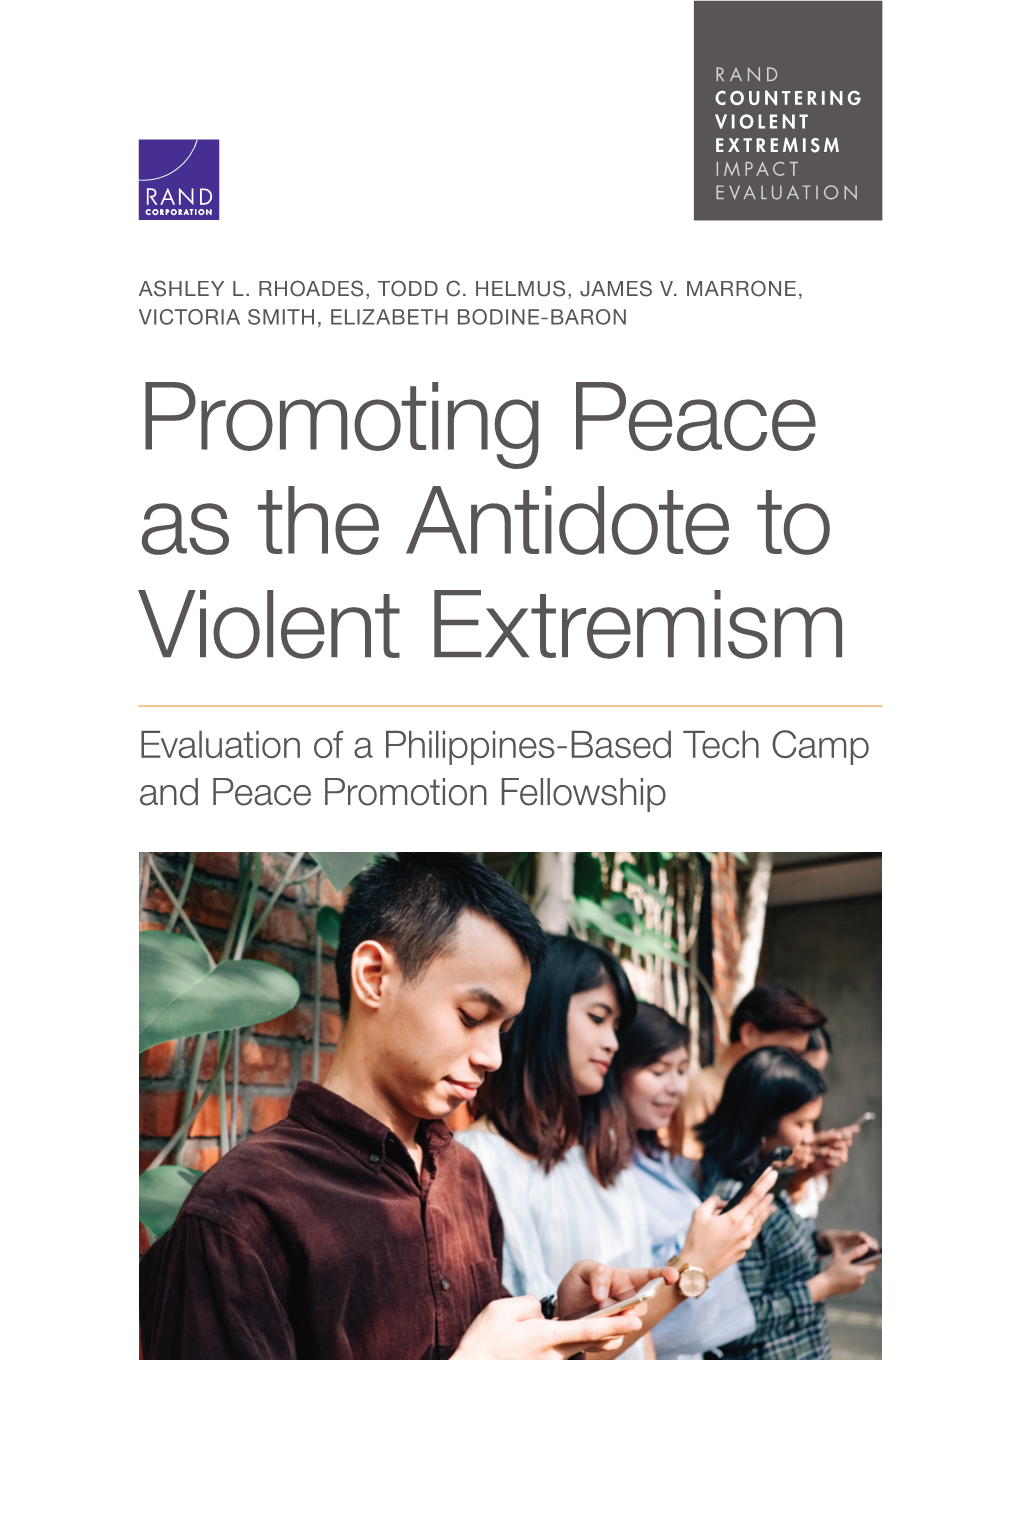 Promoting Peace As the Antidote to Violent Extremism